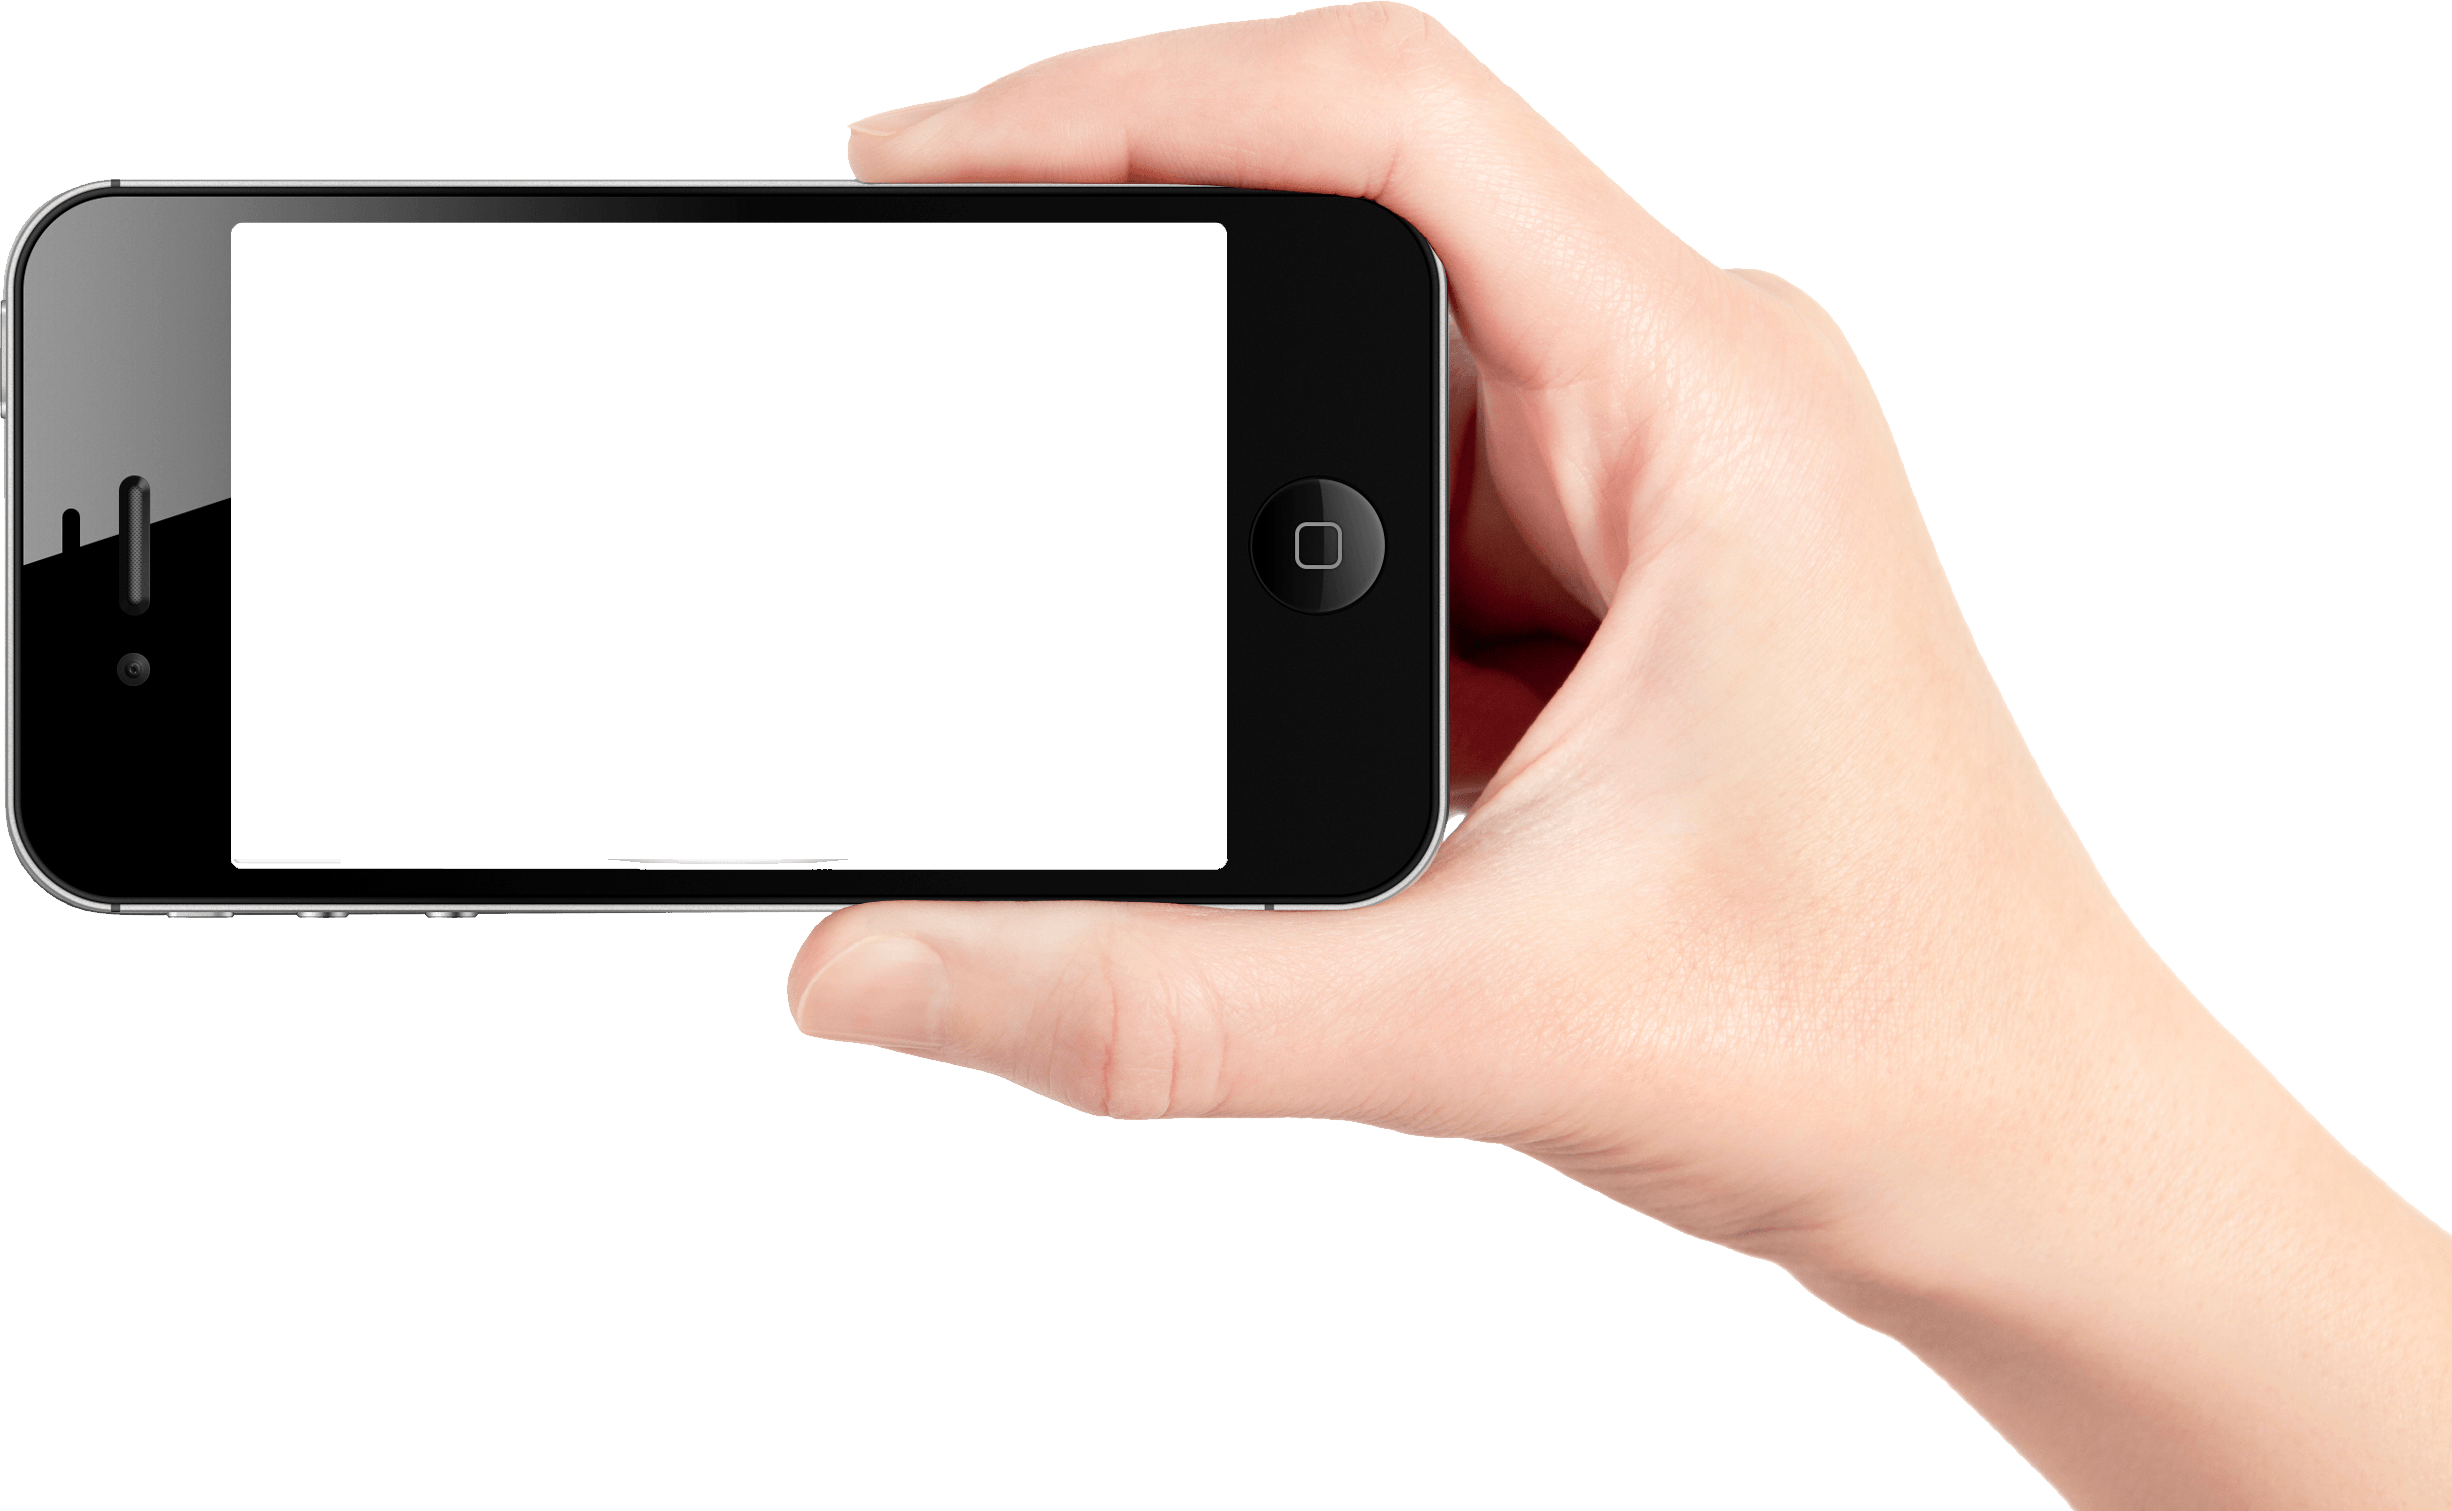 Smartphone In Hand Png Image Png Image - Smartphone, Transparent background PNG HD thumbnail